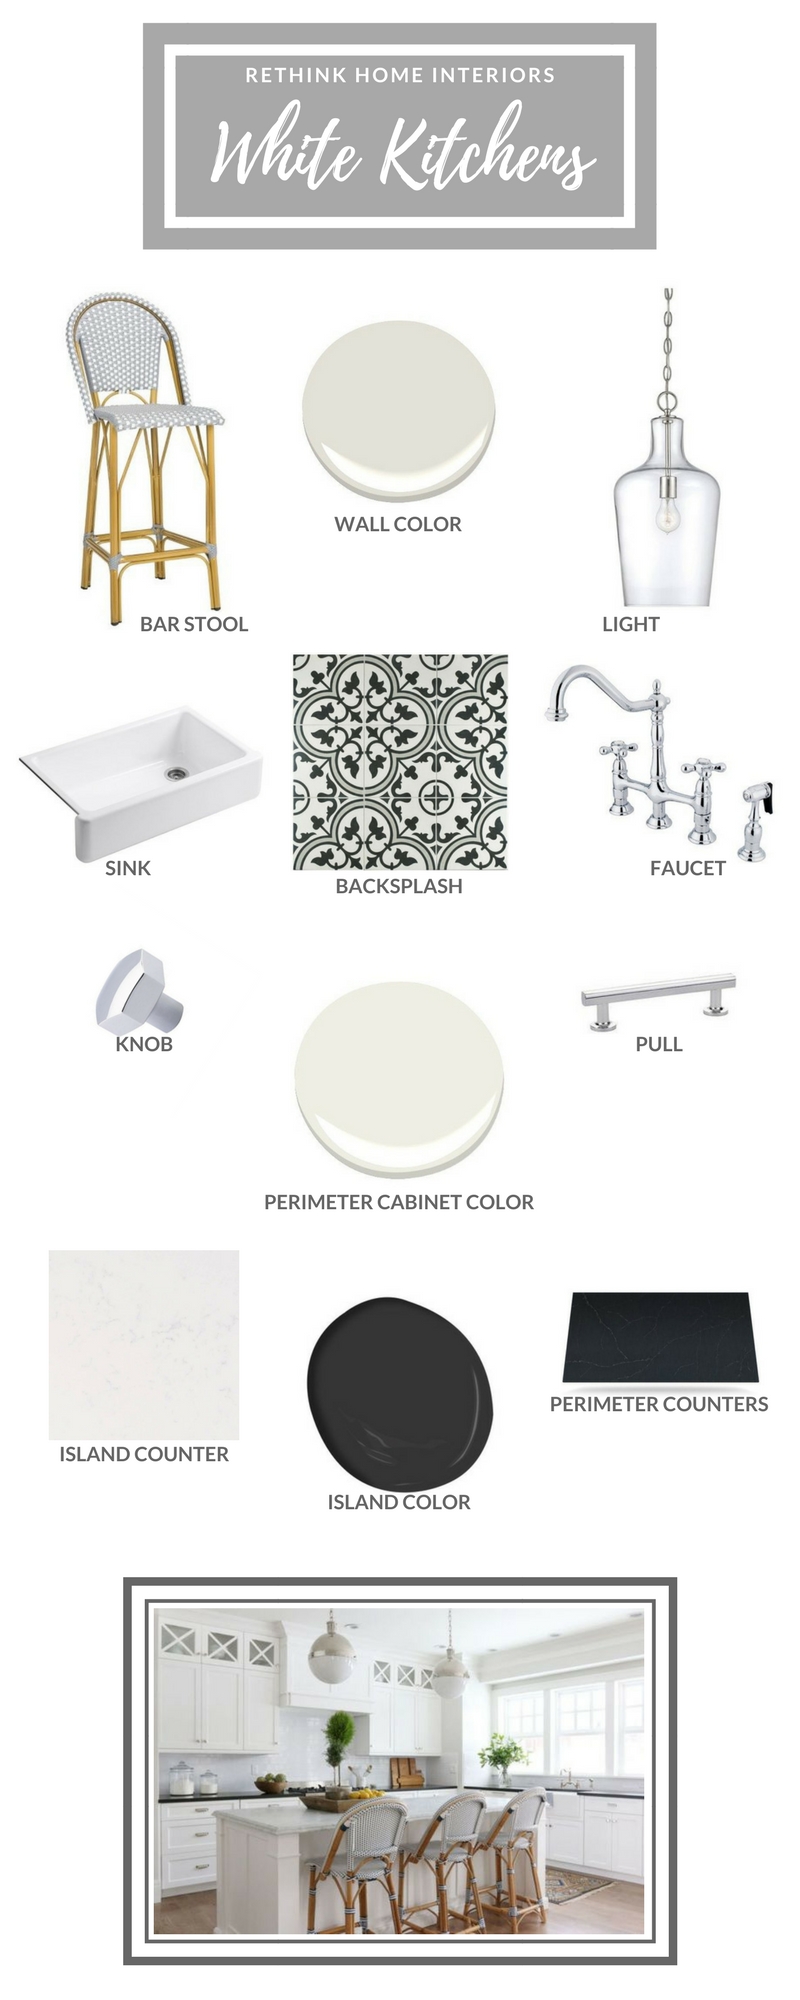 accessories inspiration for home with sinks, faucets, wall color